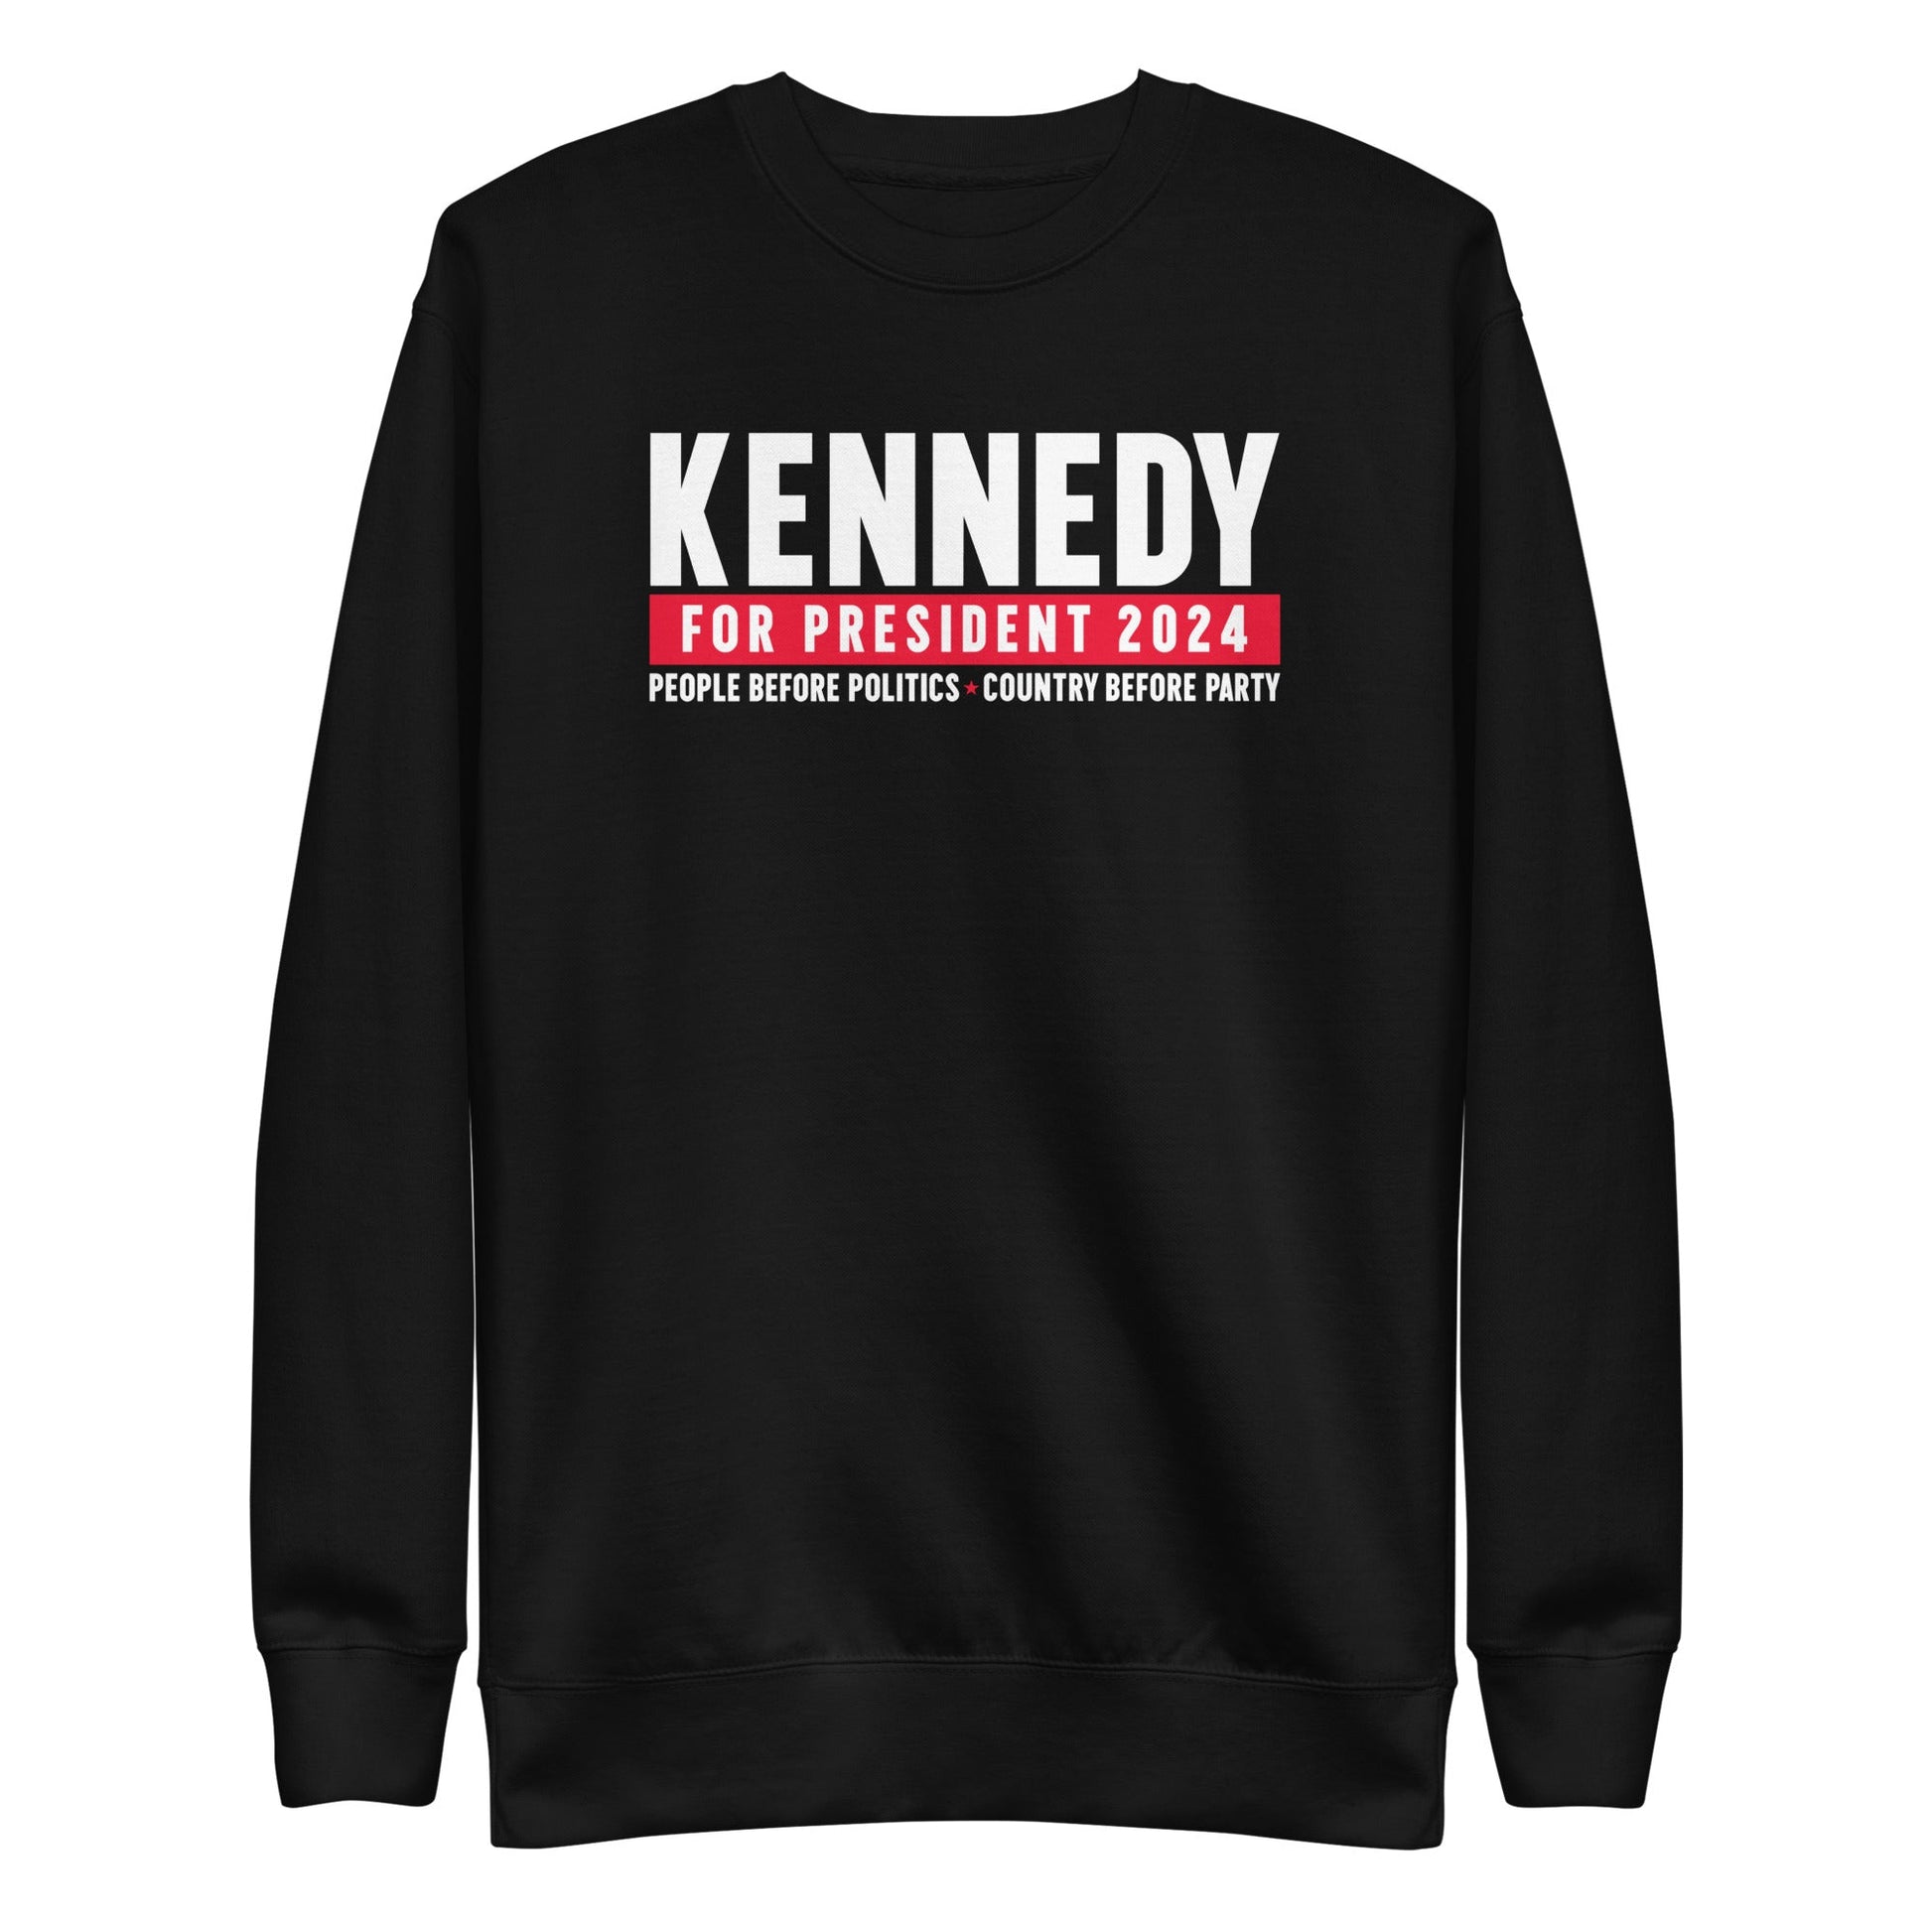 Kennedy for the People Unisex Sweatshirt - TEAM KENNEDY. All rights reserved